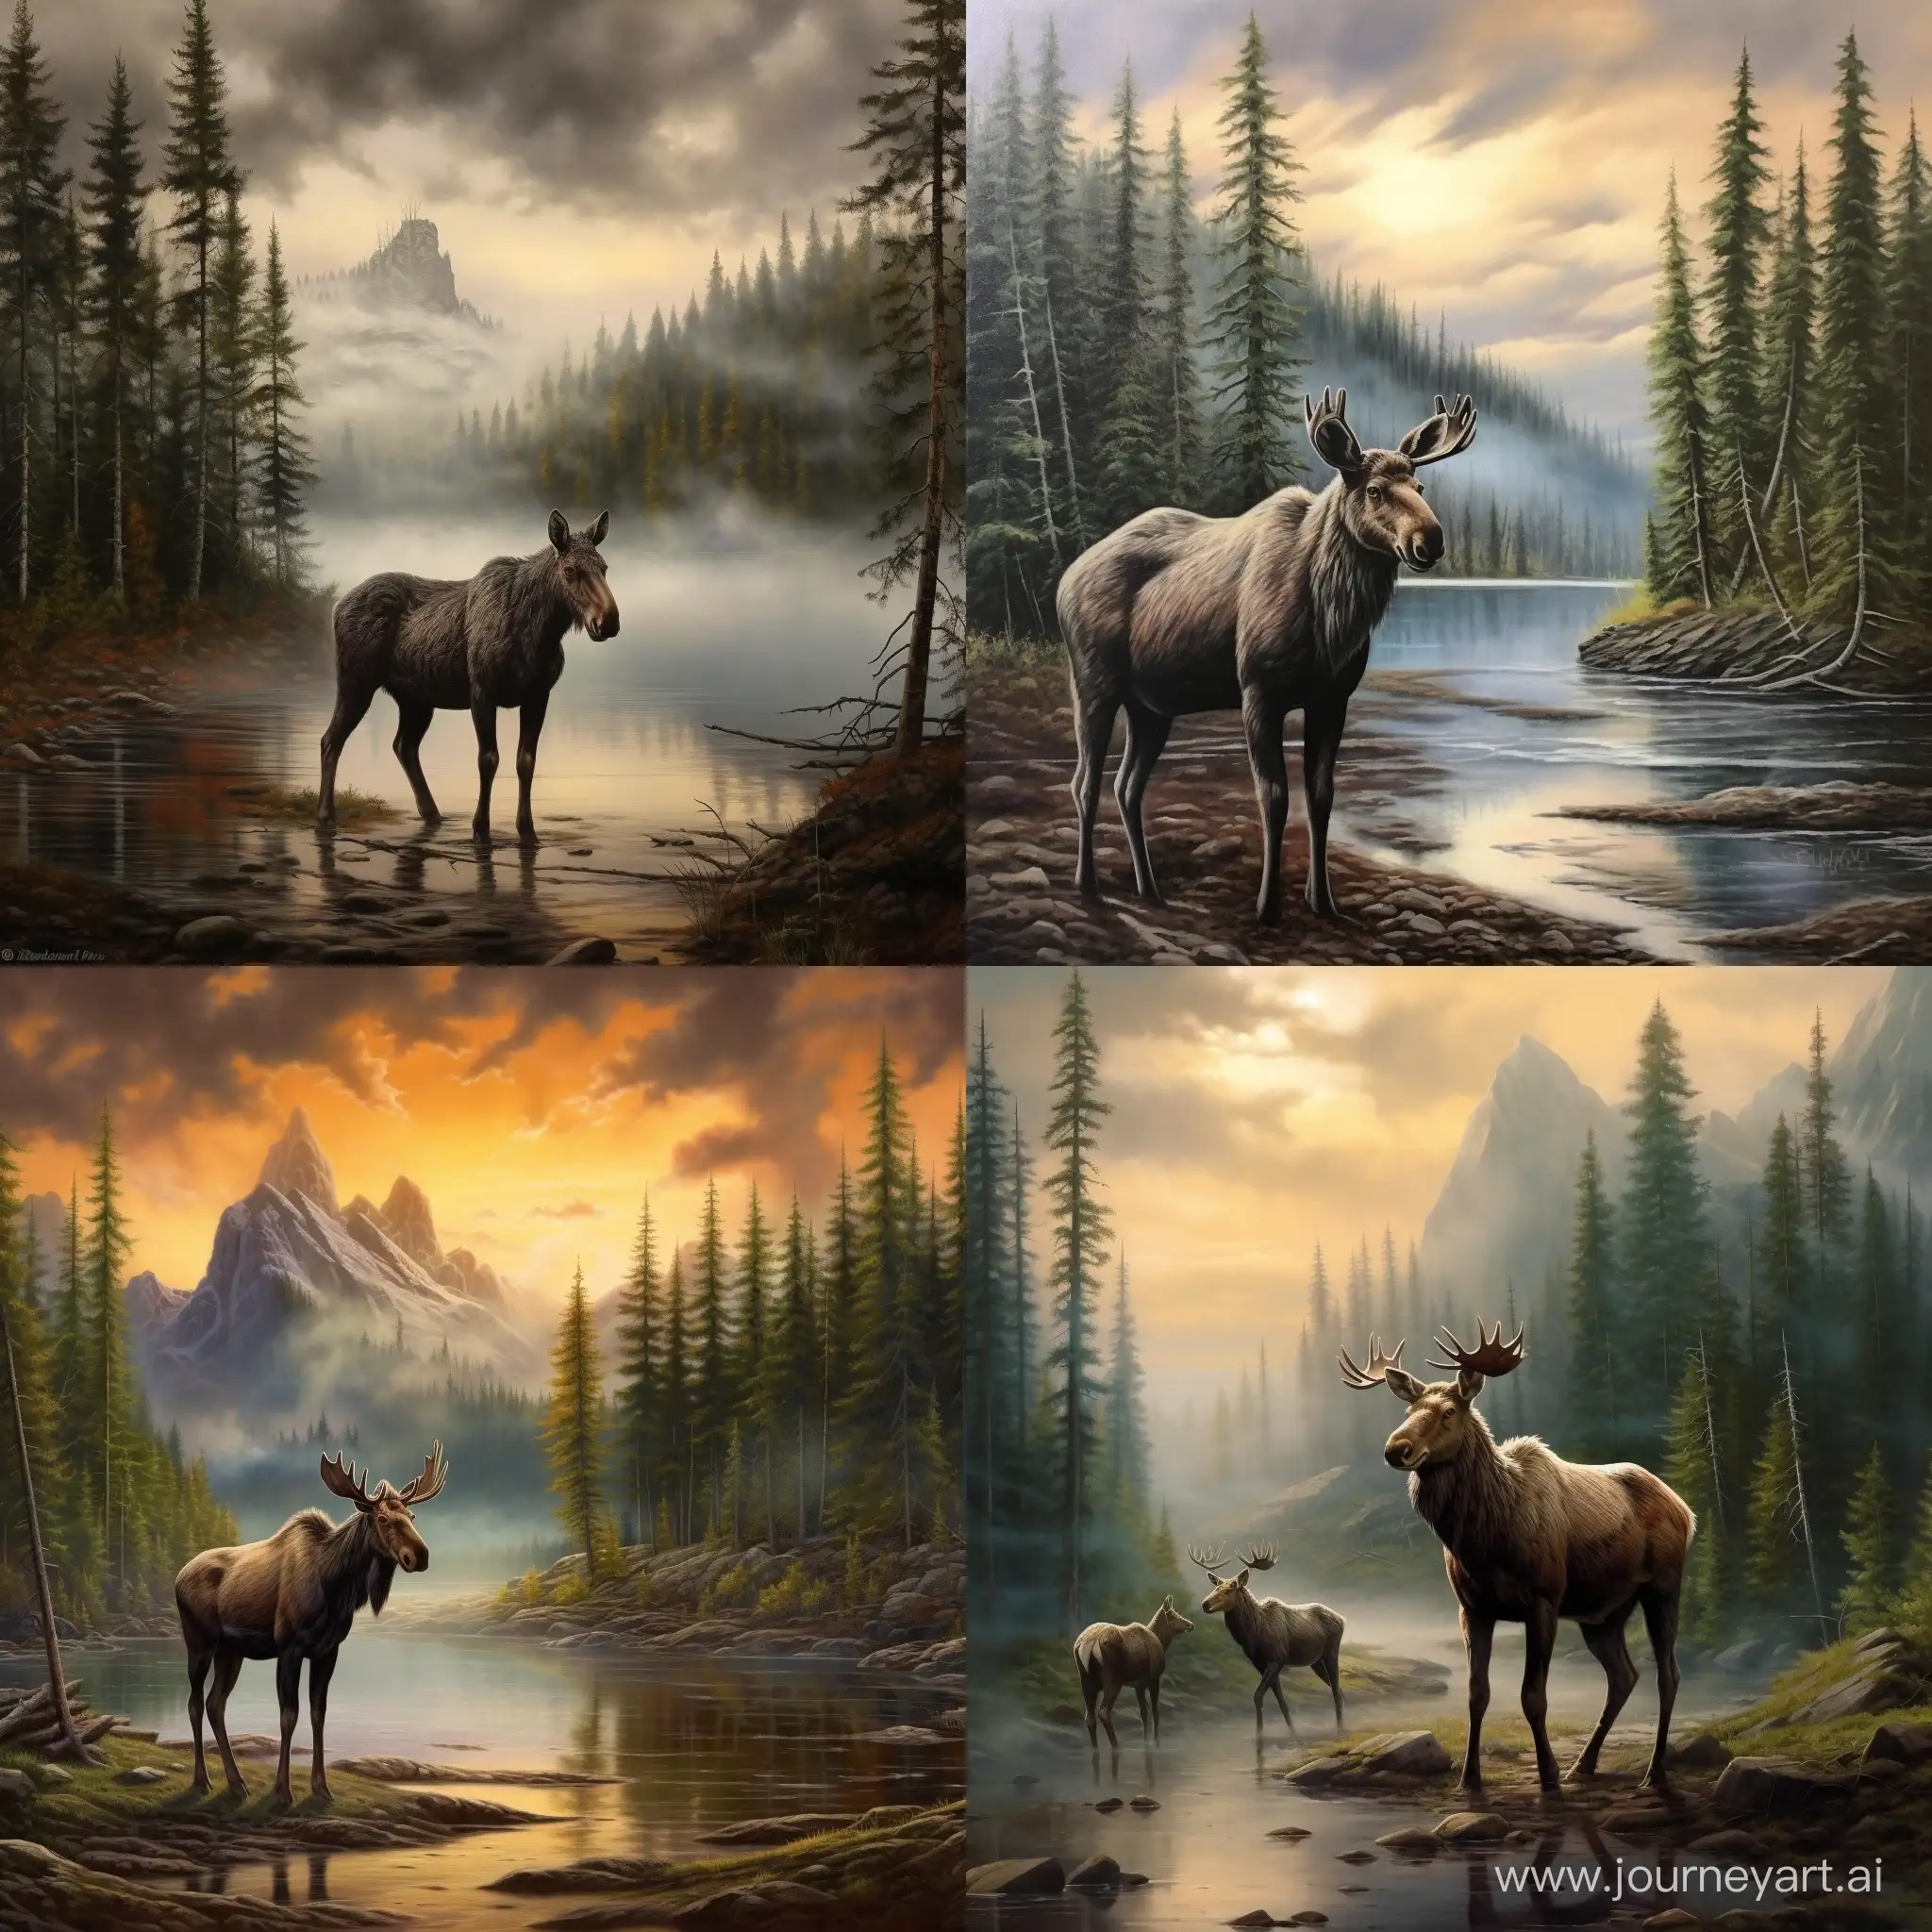 Majestic-Moose-by-the-Mountain-River-under-Fine-Rain-Clouds